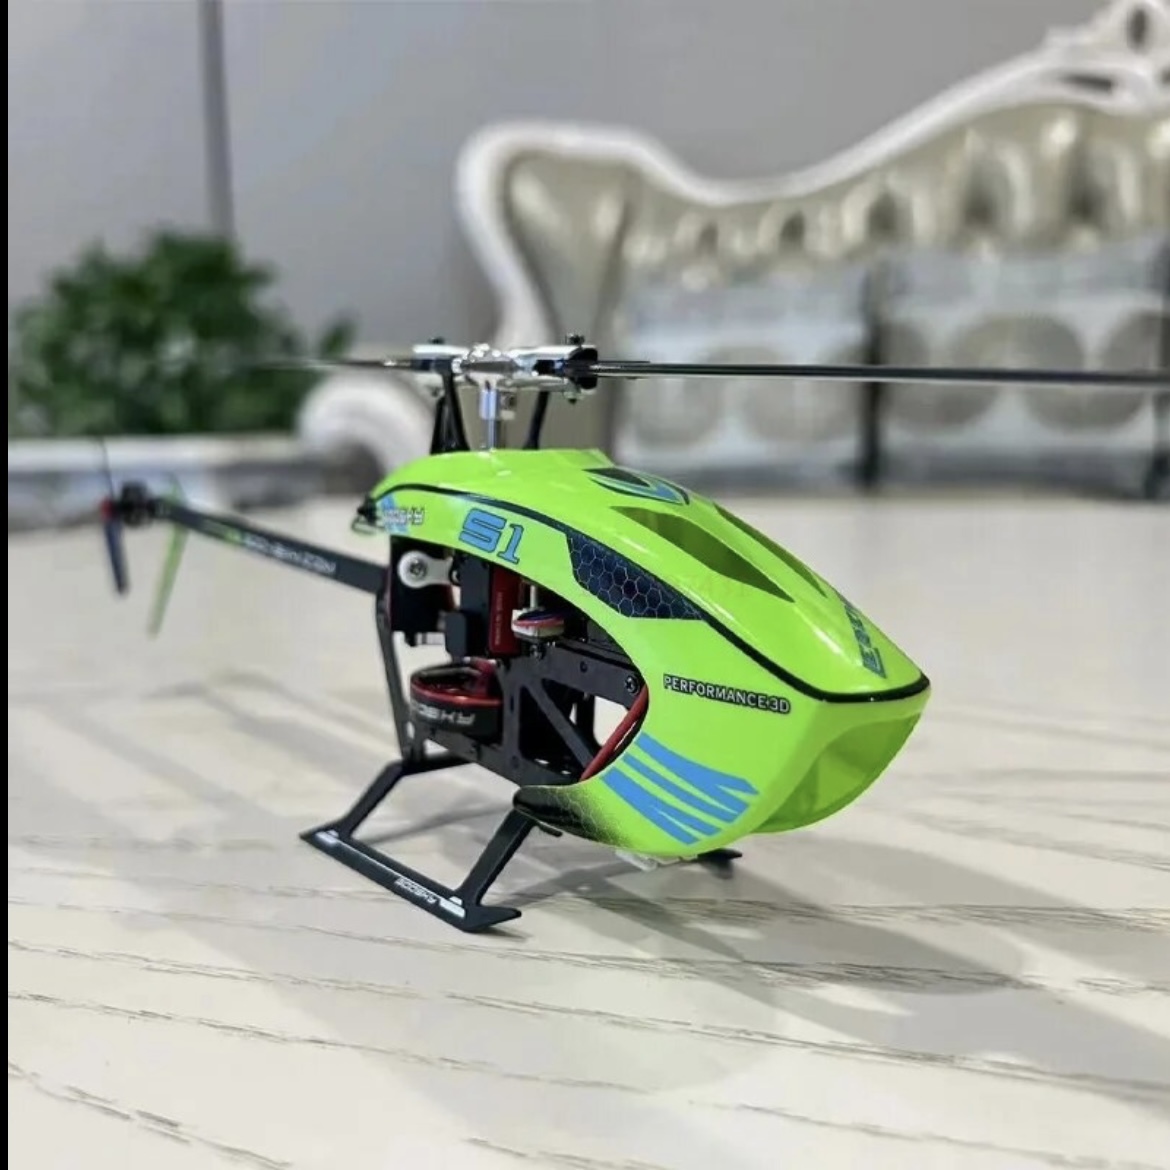  height performance 6 axis Gyro installing GOOSKY LEGEND S1 helicopter ( pink ) radio-controller RChe rear black 3D. leaf Futaba JR